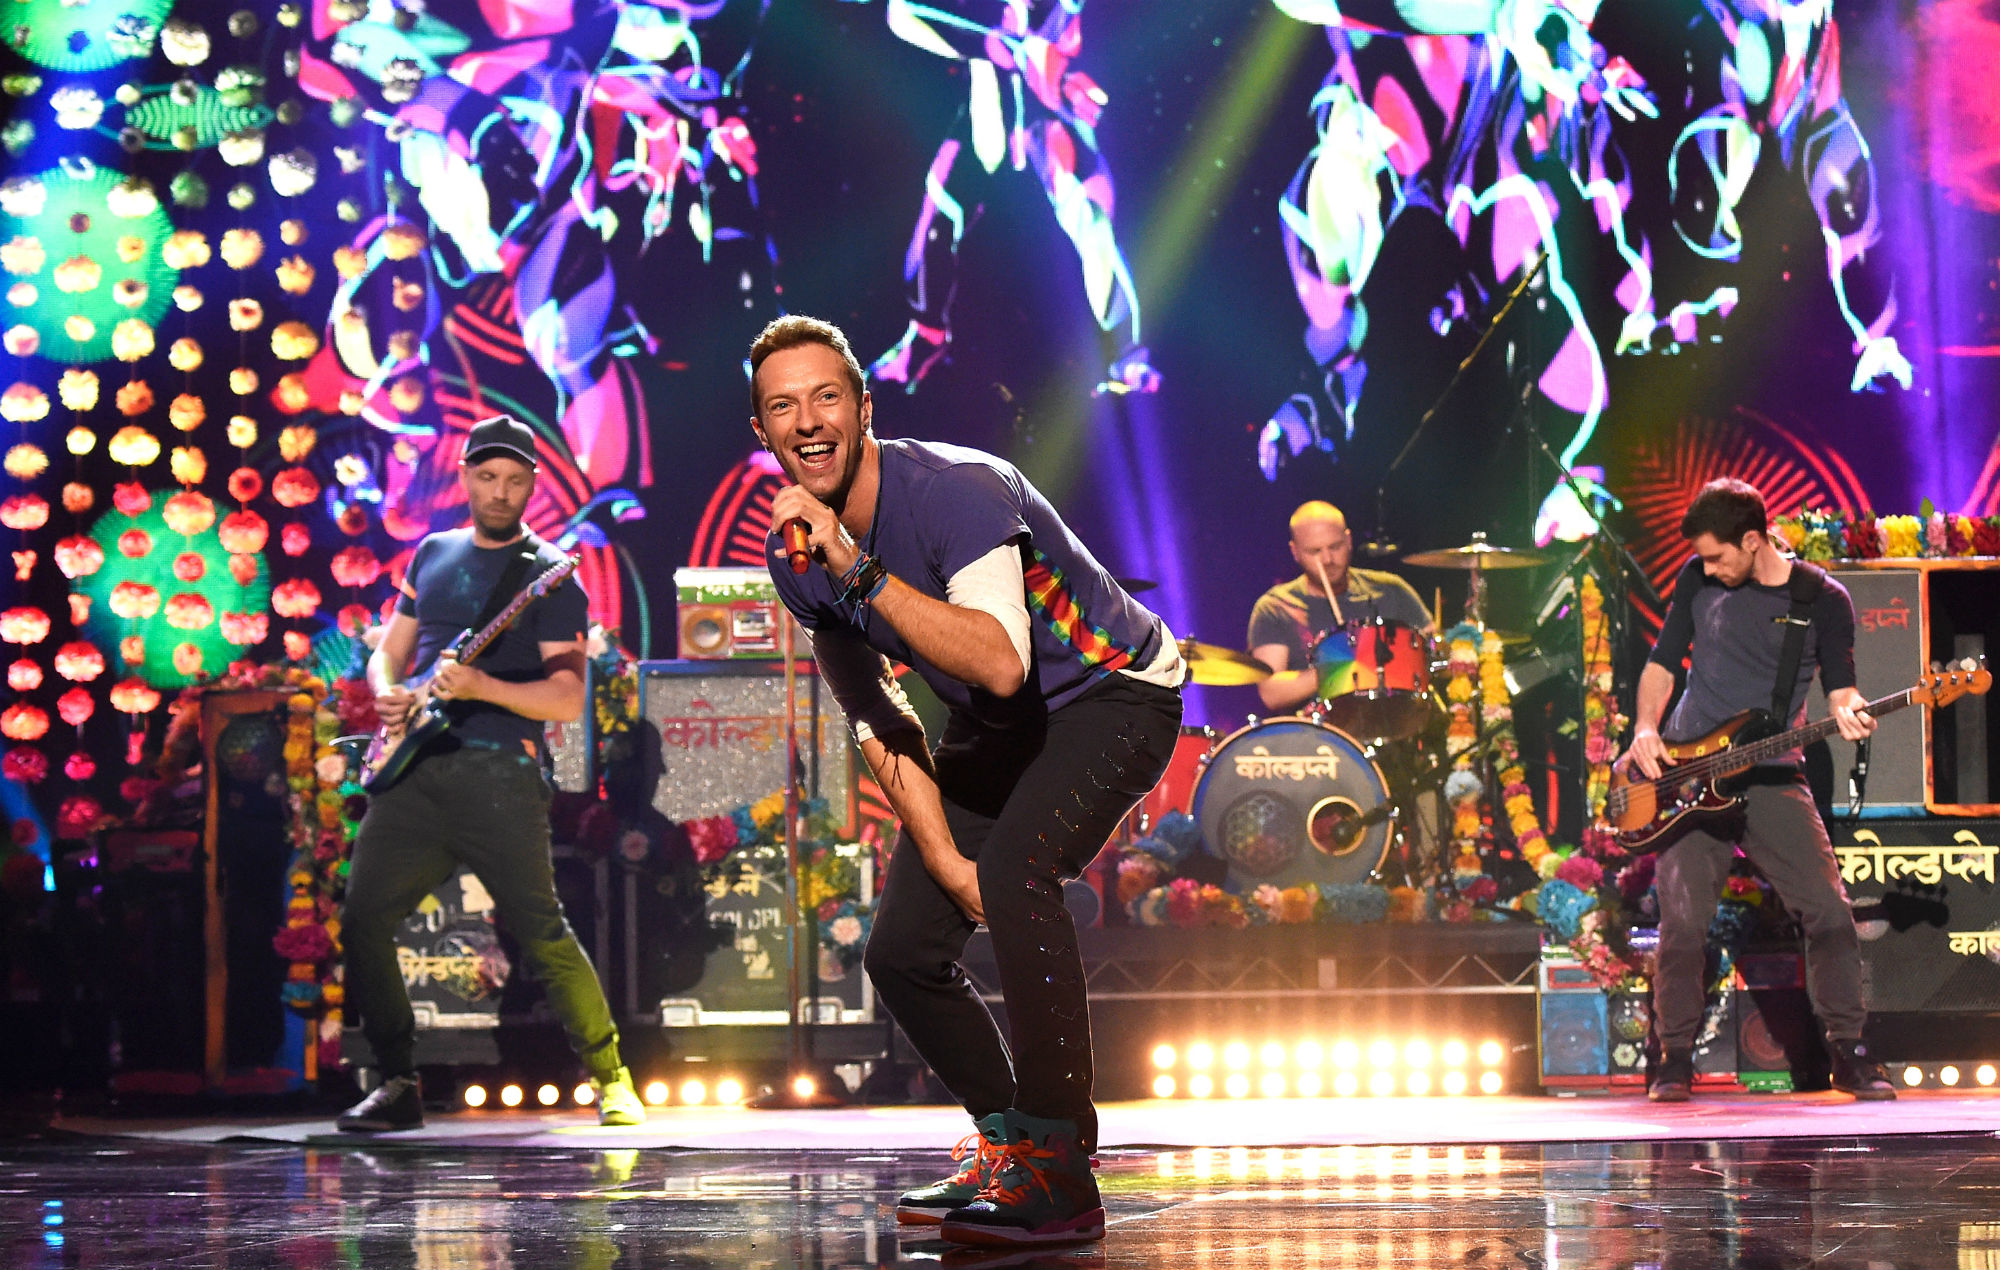 coldplay full discography torrent